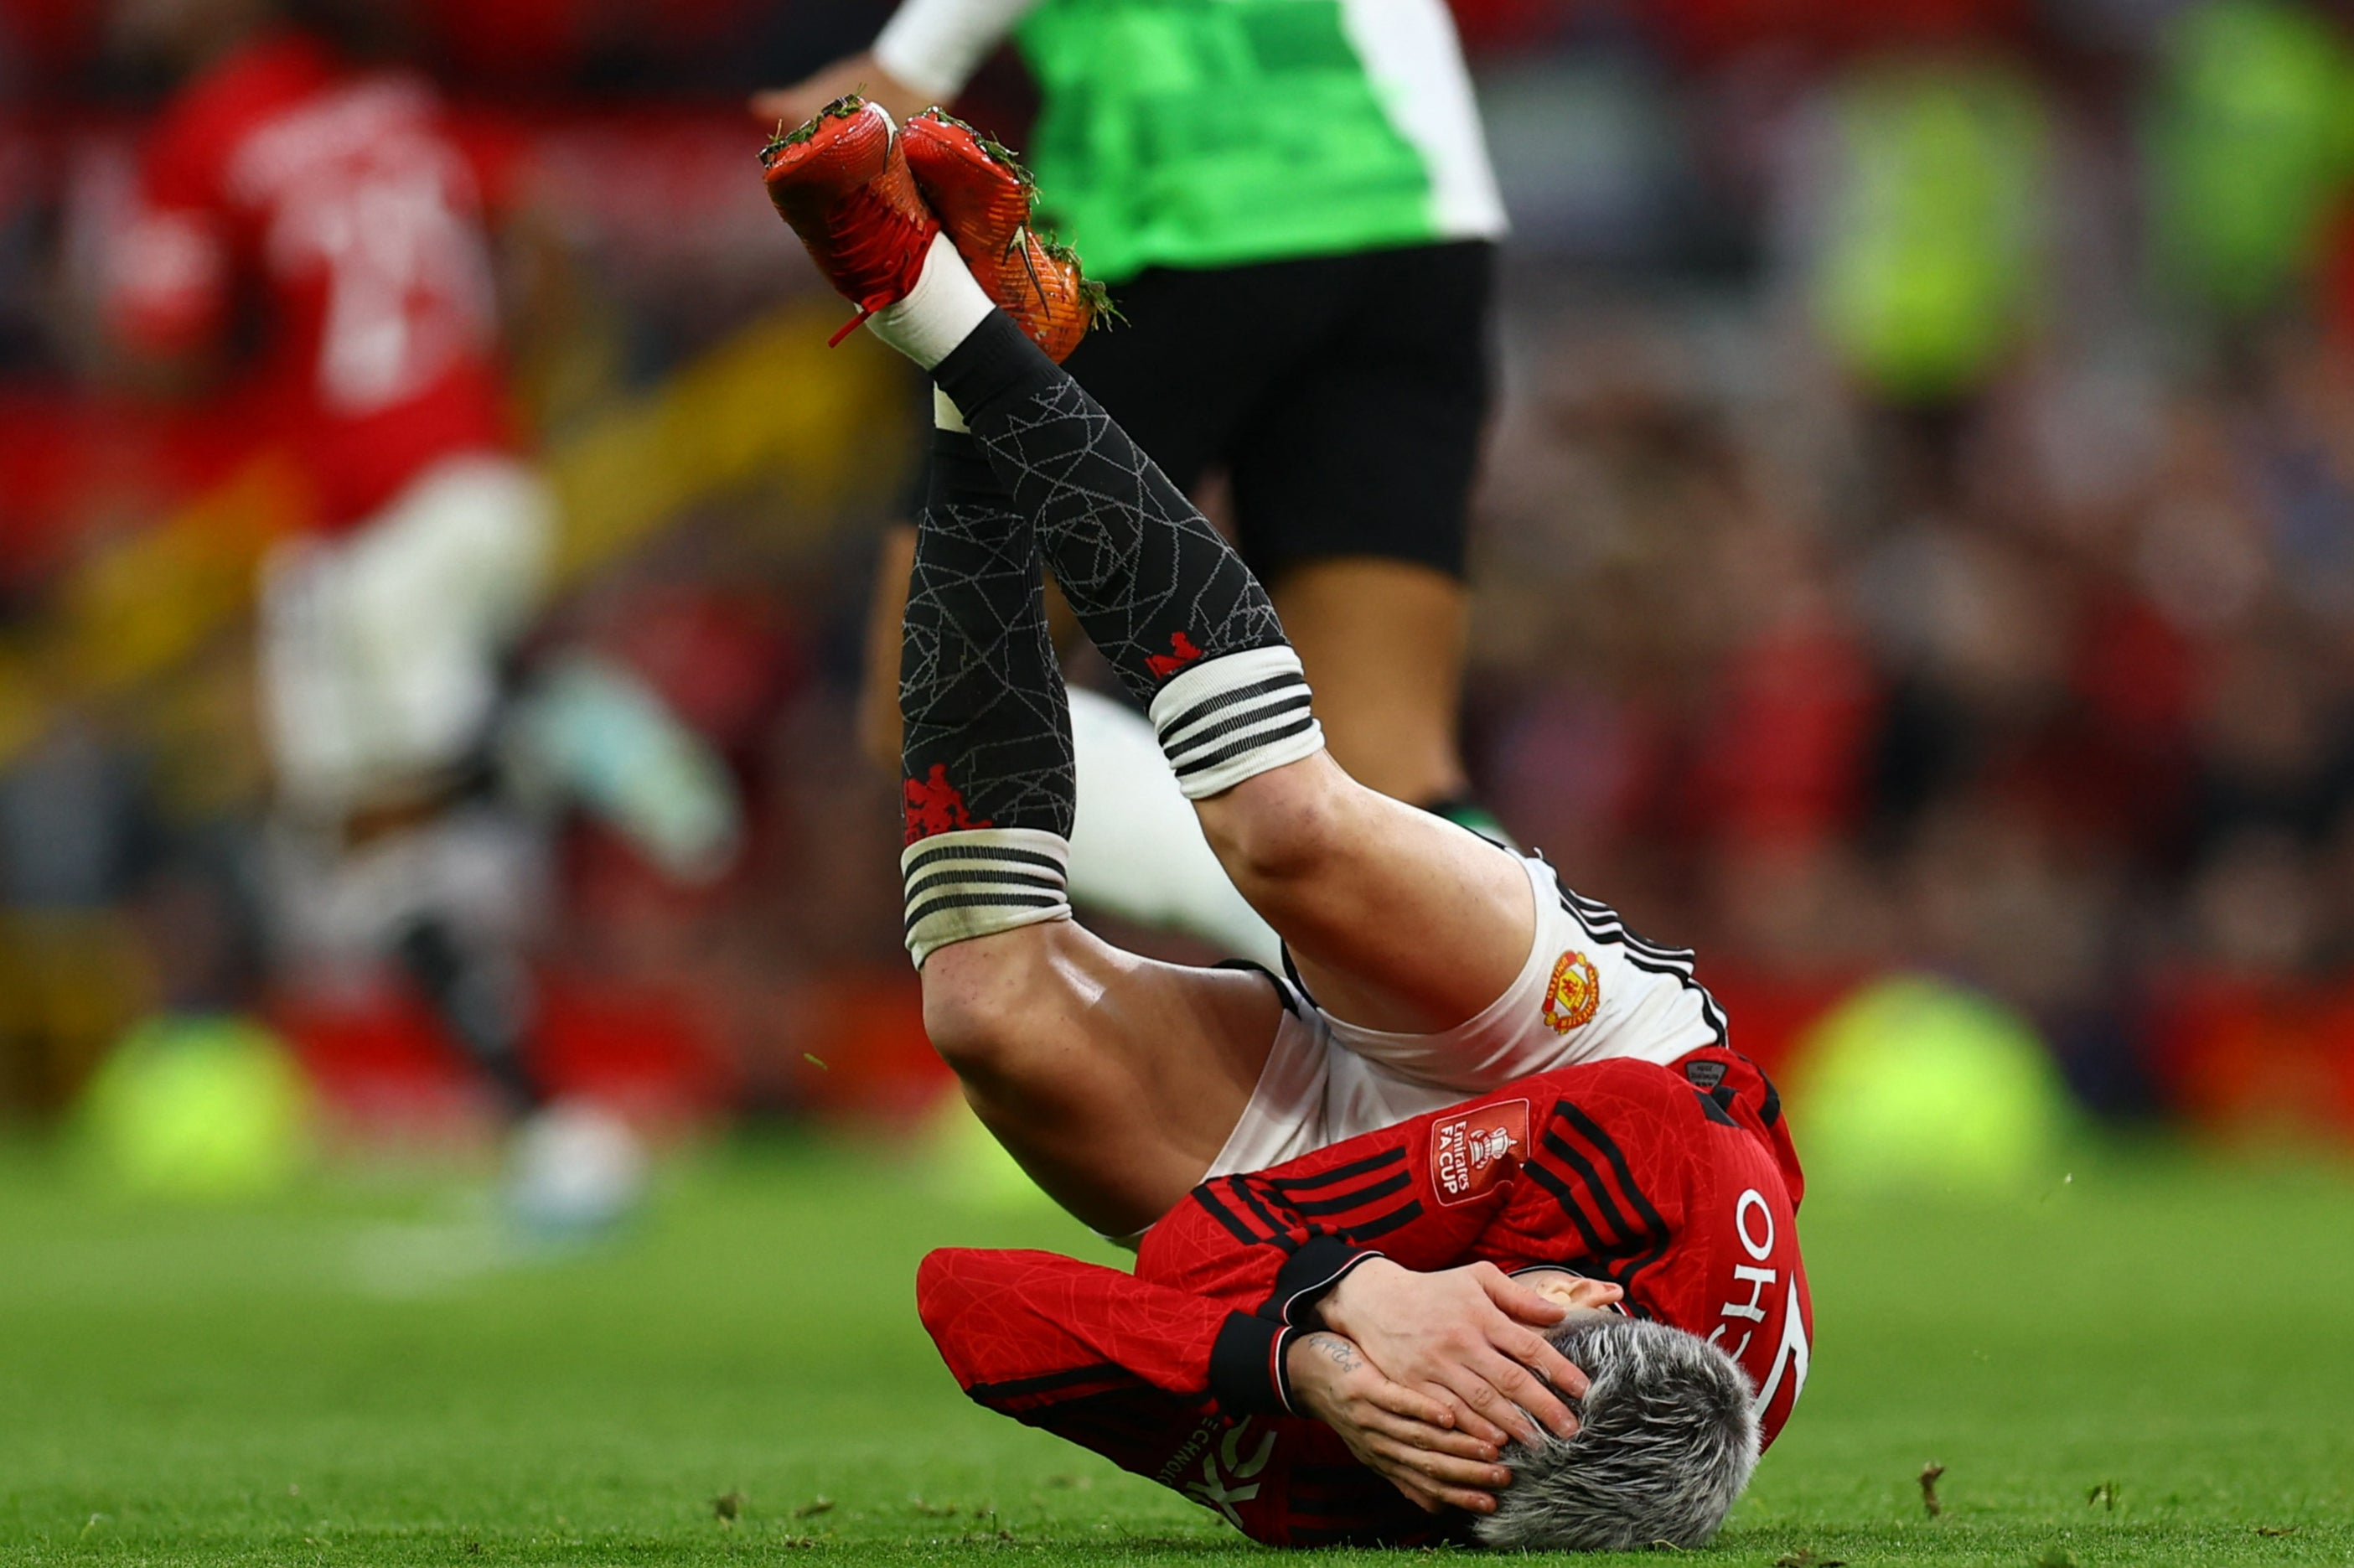 Manchester United have been bitten by the injury bug